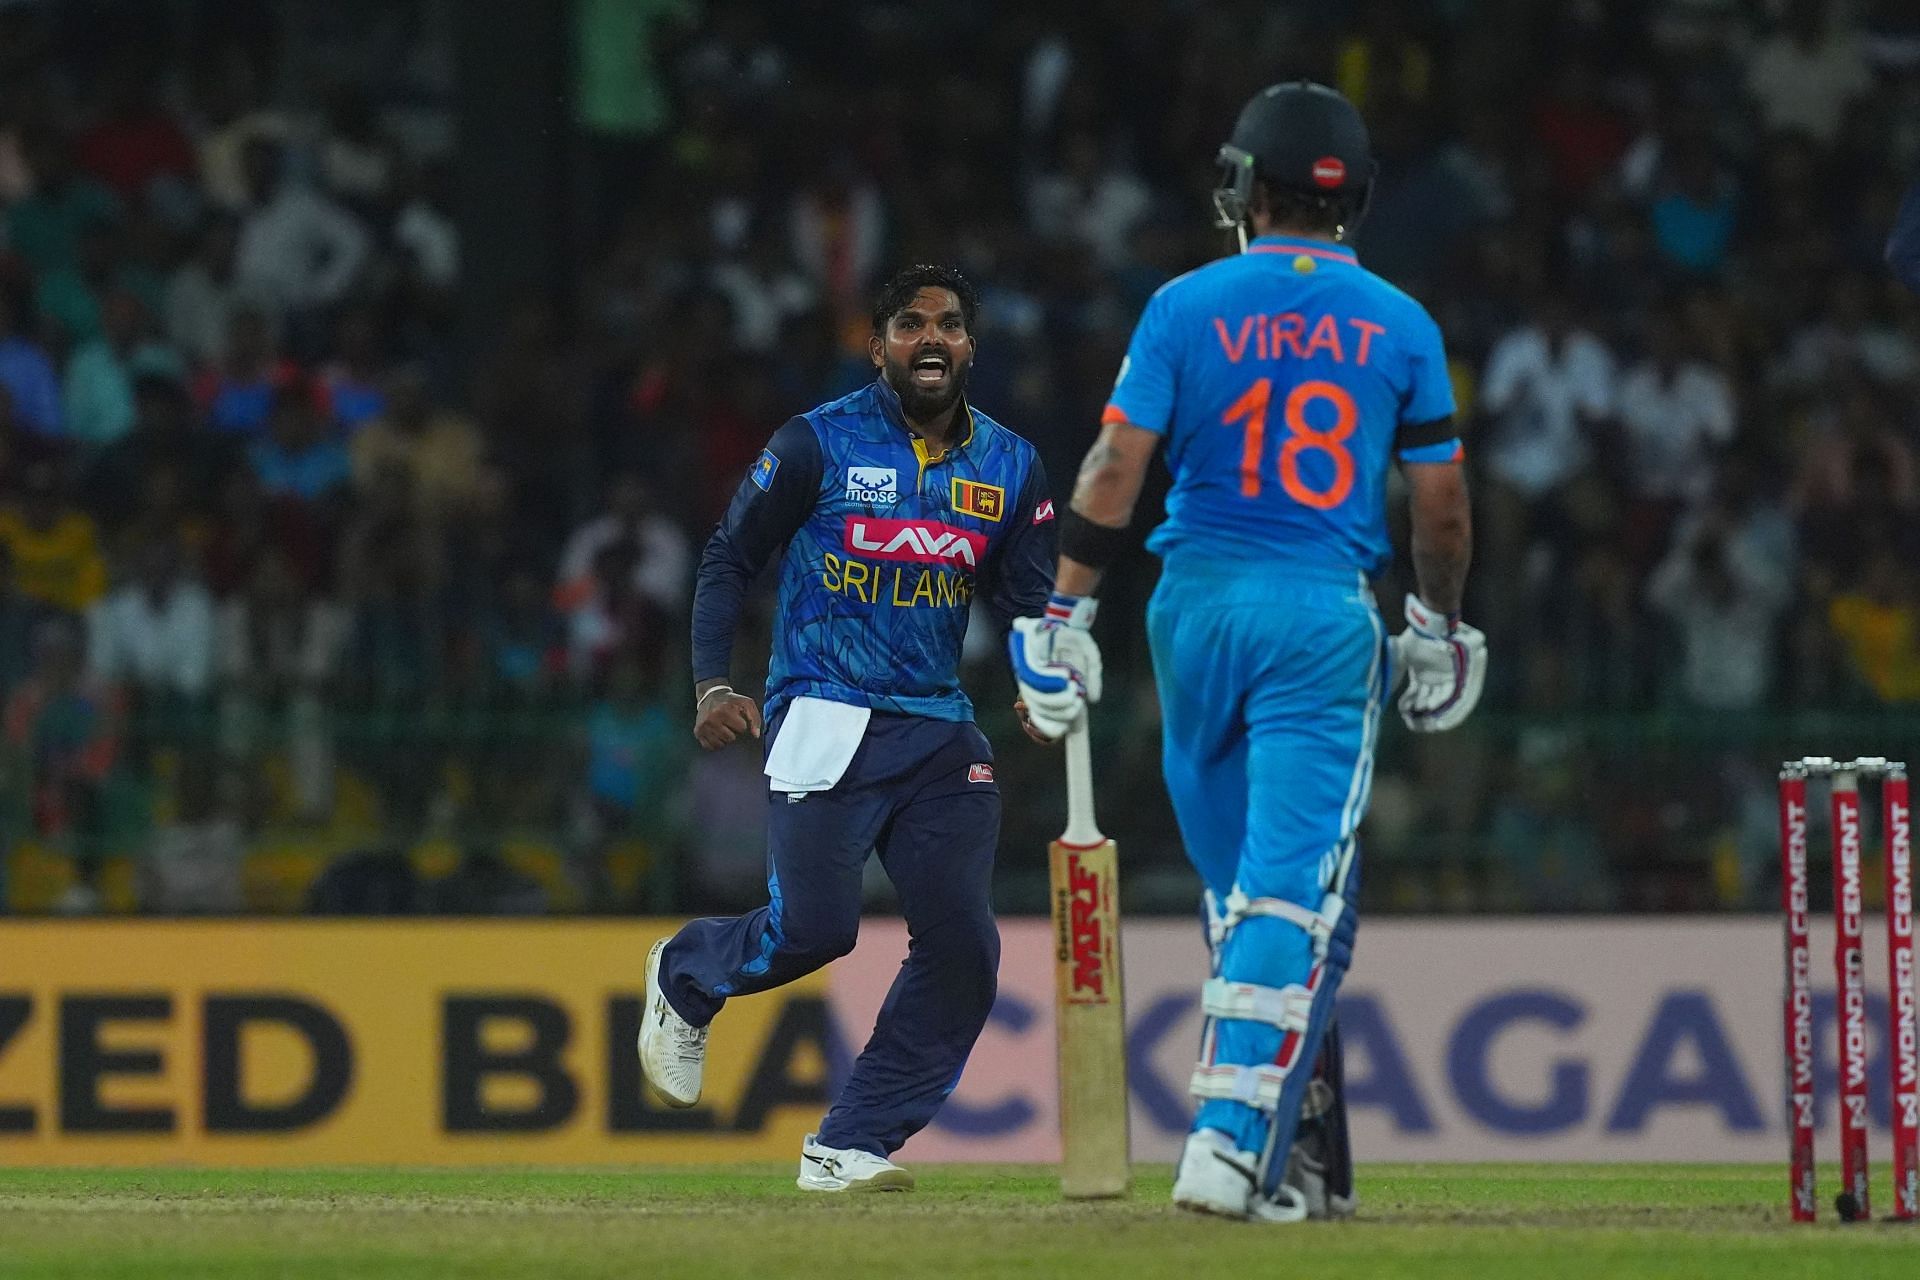 Sri Lanka vs India, 2nd ODI: Probable XI, Match Prediction, Pitch Report, Weather Forecast, and Live Streaming Details